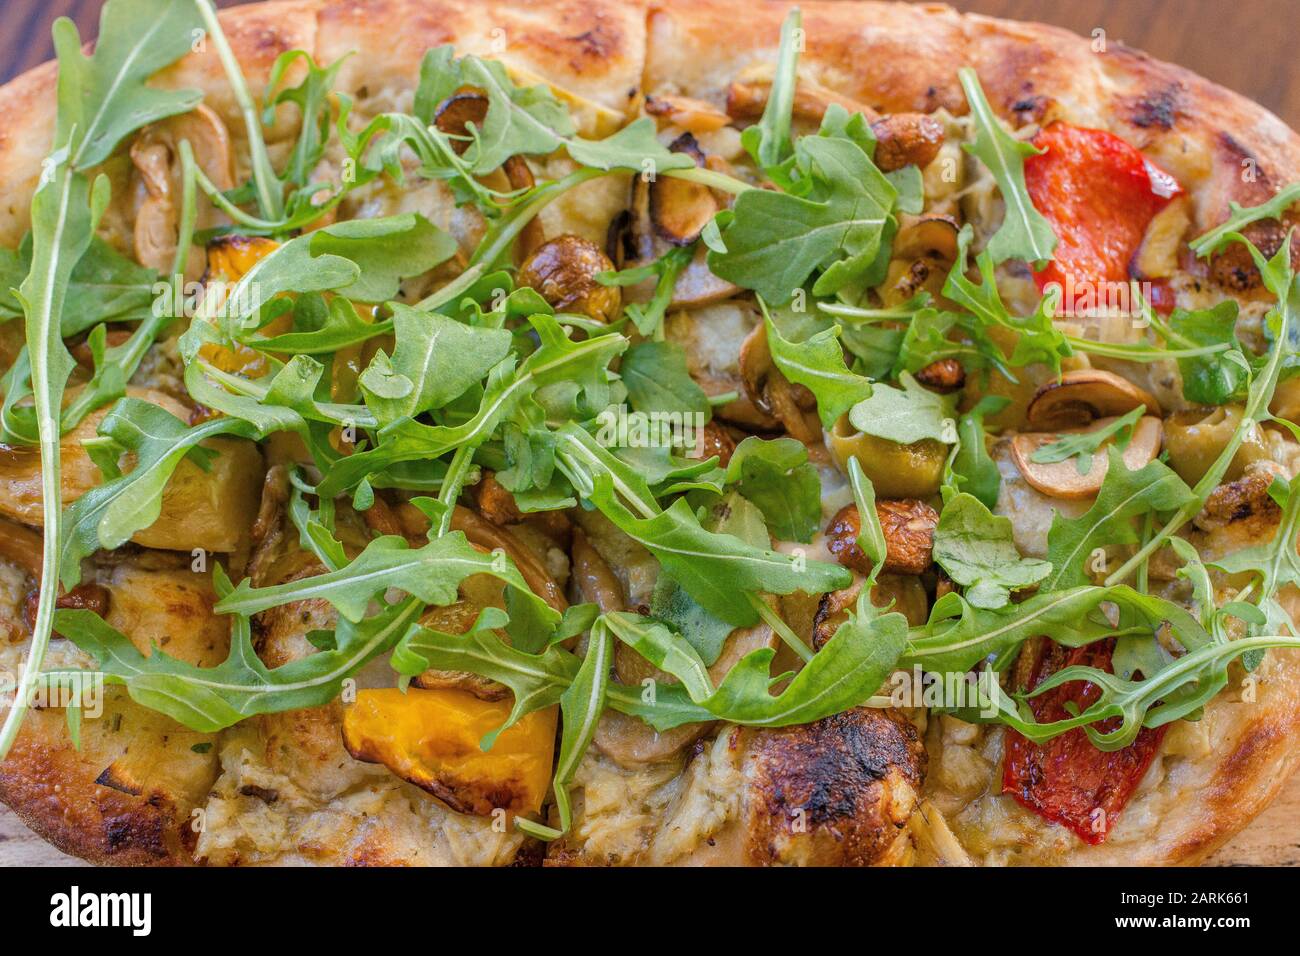 Close-up view of an Italian vegetable flatbread Stock Photo